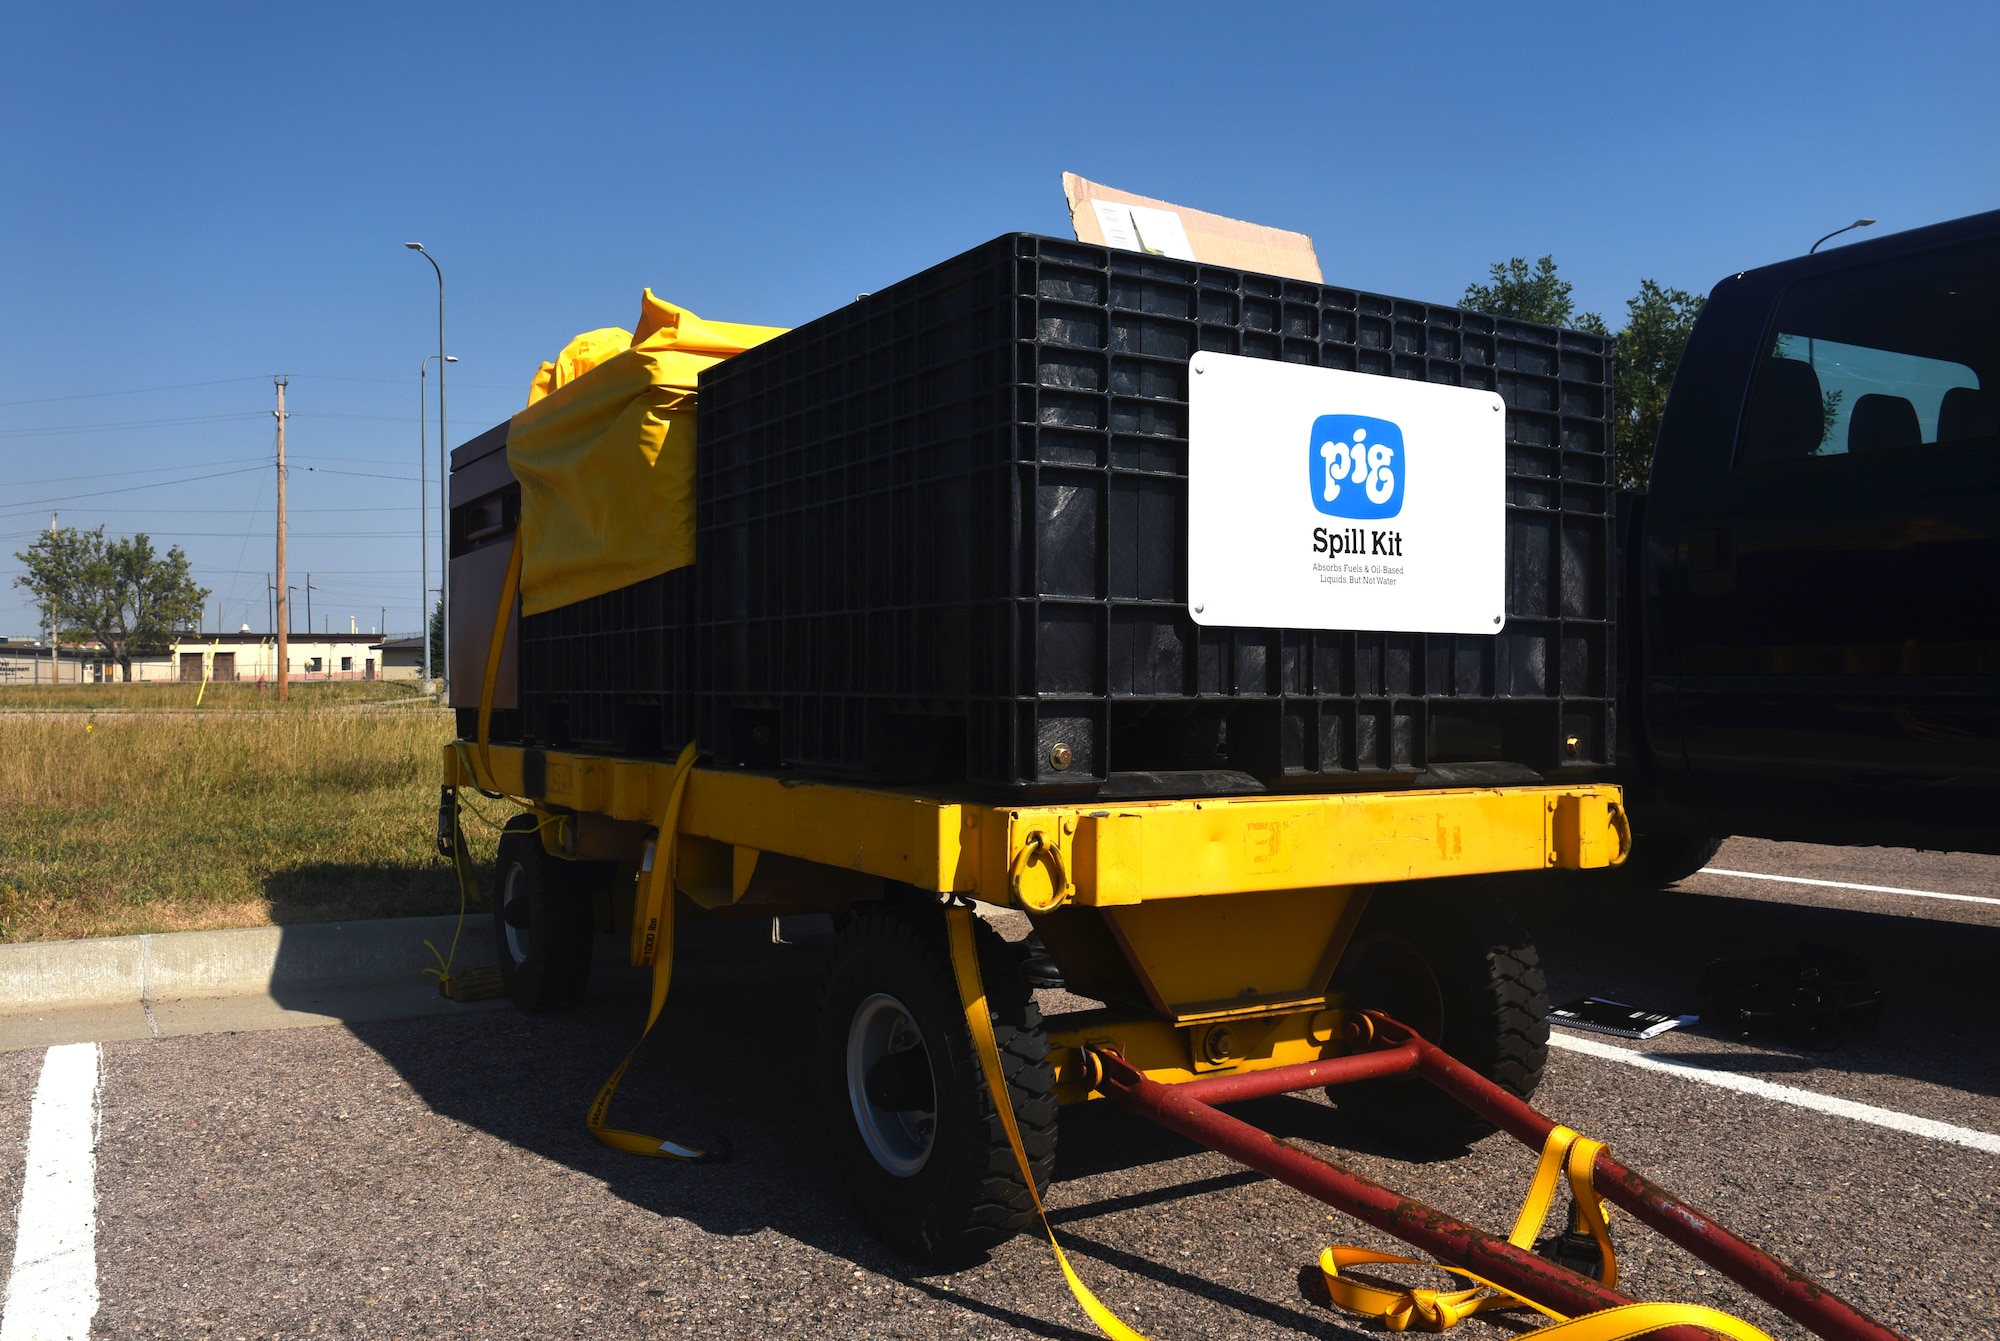 The SpillRaider II trailer is stored outside of the 28th Civil Engineer Squadron headquarters at Ellsworth Air Force Base, S.D., Sept. 17, 2018. The SpillRaider II trailer is equipped with a larger pump than SpillRaider I, and requires a larger air compressor like the ones typically be used by the 28th CES. (U.S. Air Force photo by Airman Christina Bennett)